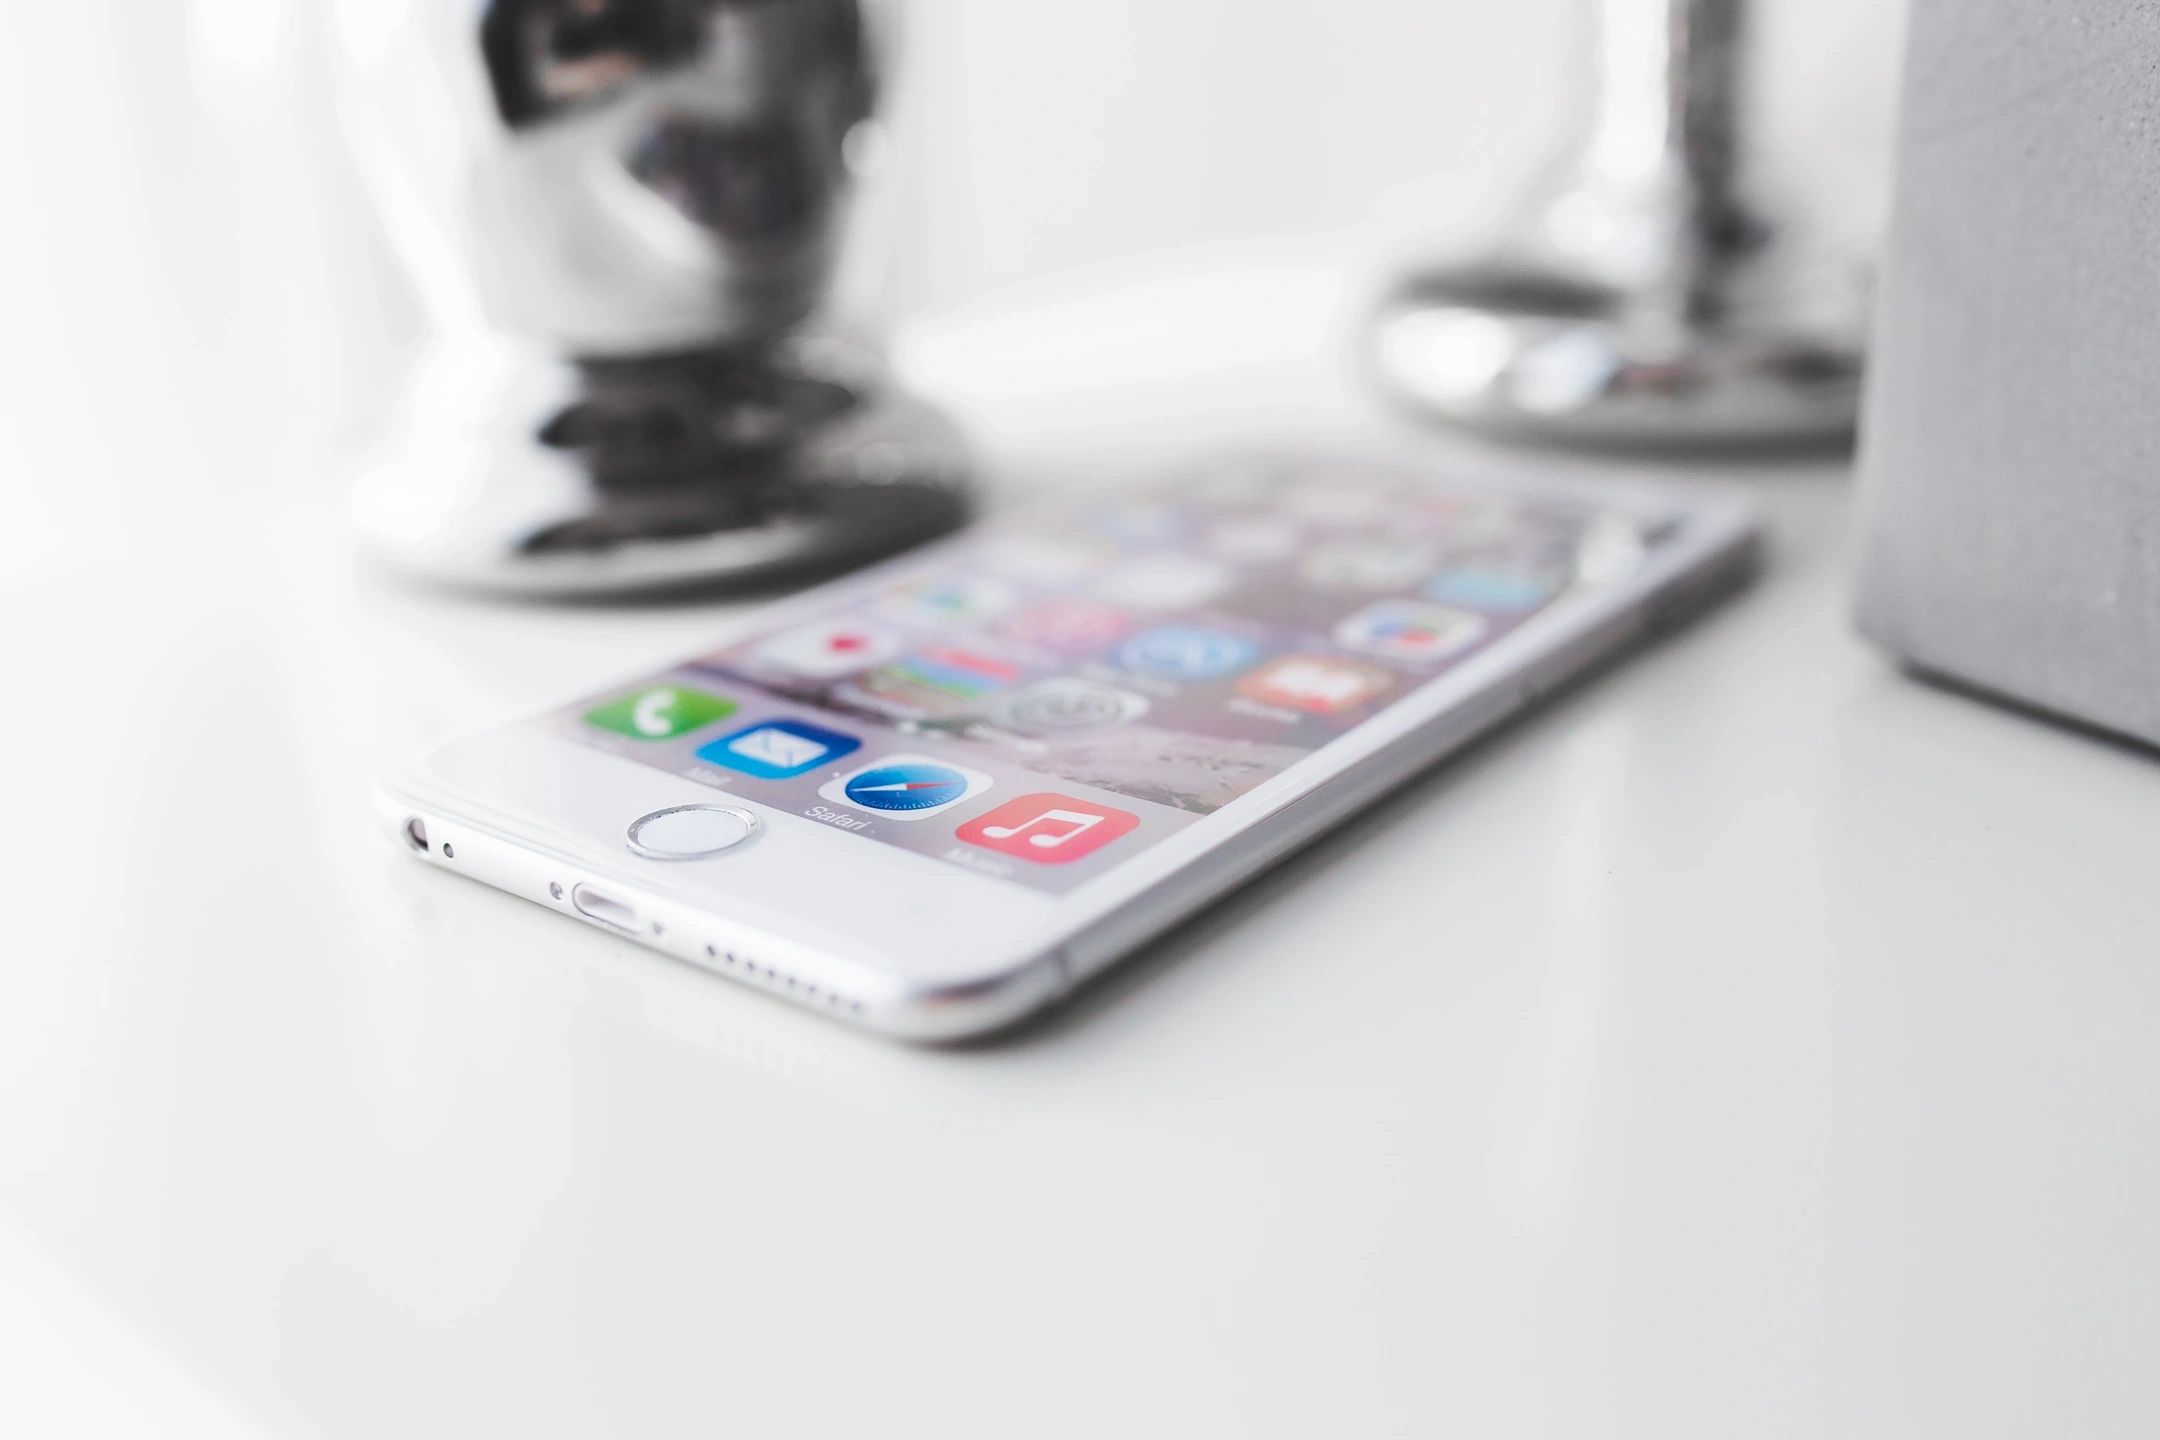 Image Of A White Smart Phone On A White Table